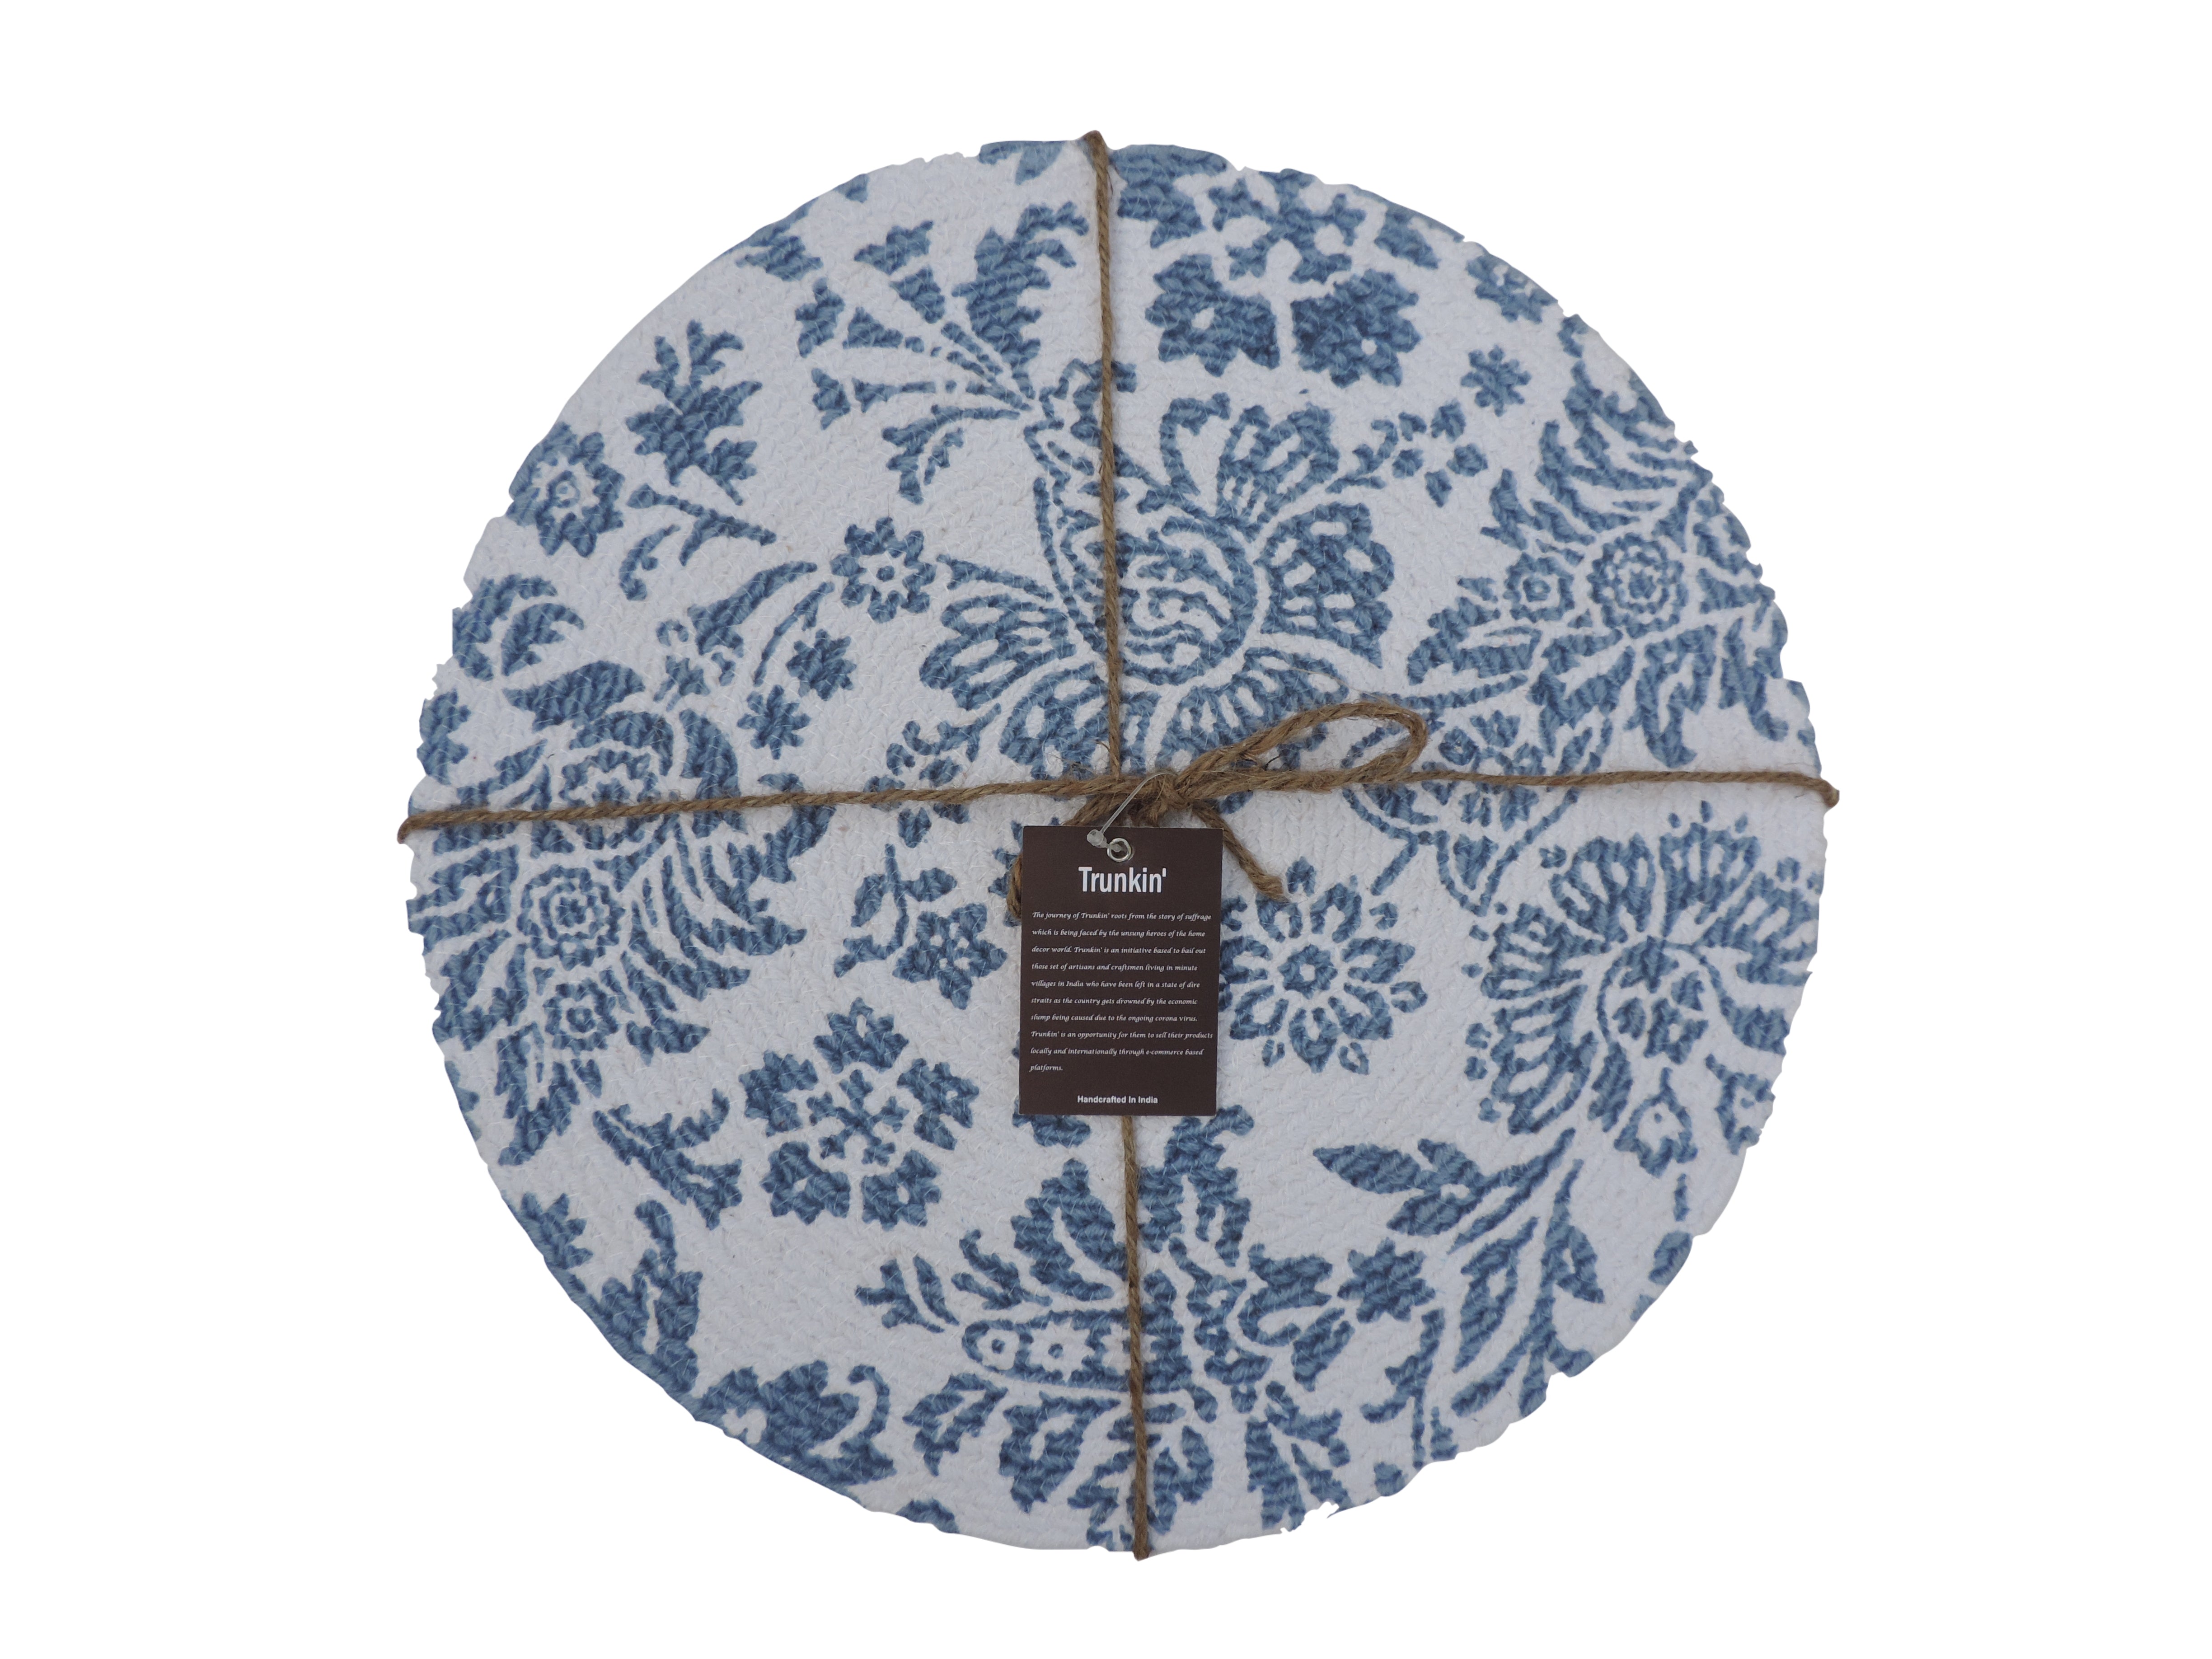 Jute Placemats, Chargers / Set of 2 / 15 in. Round/ White & Blue